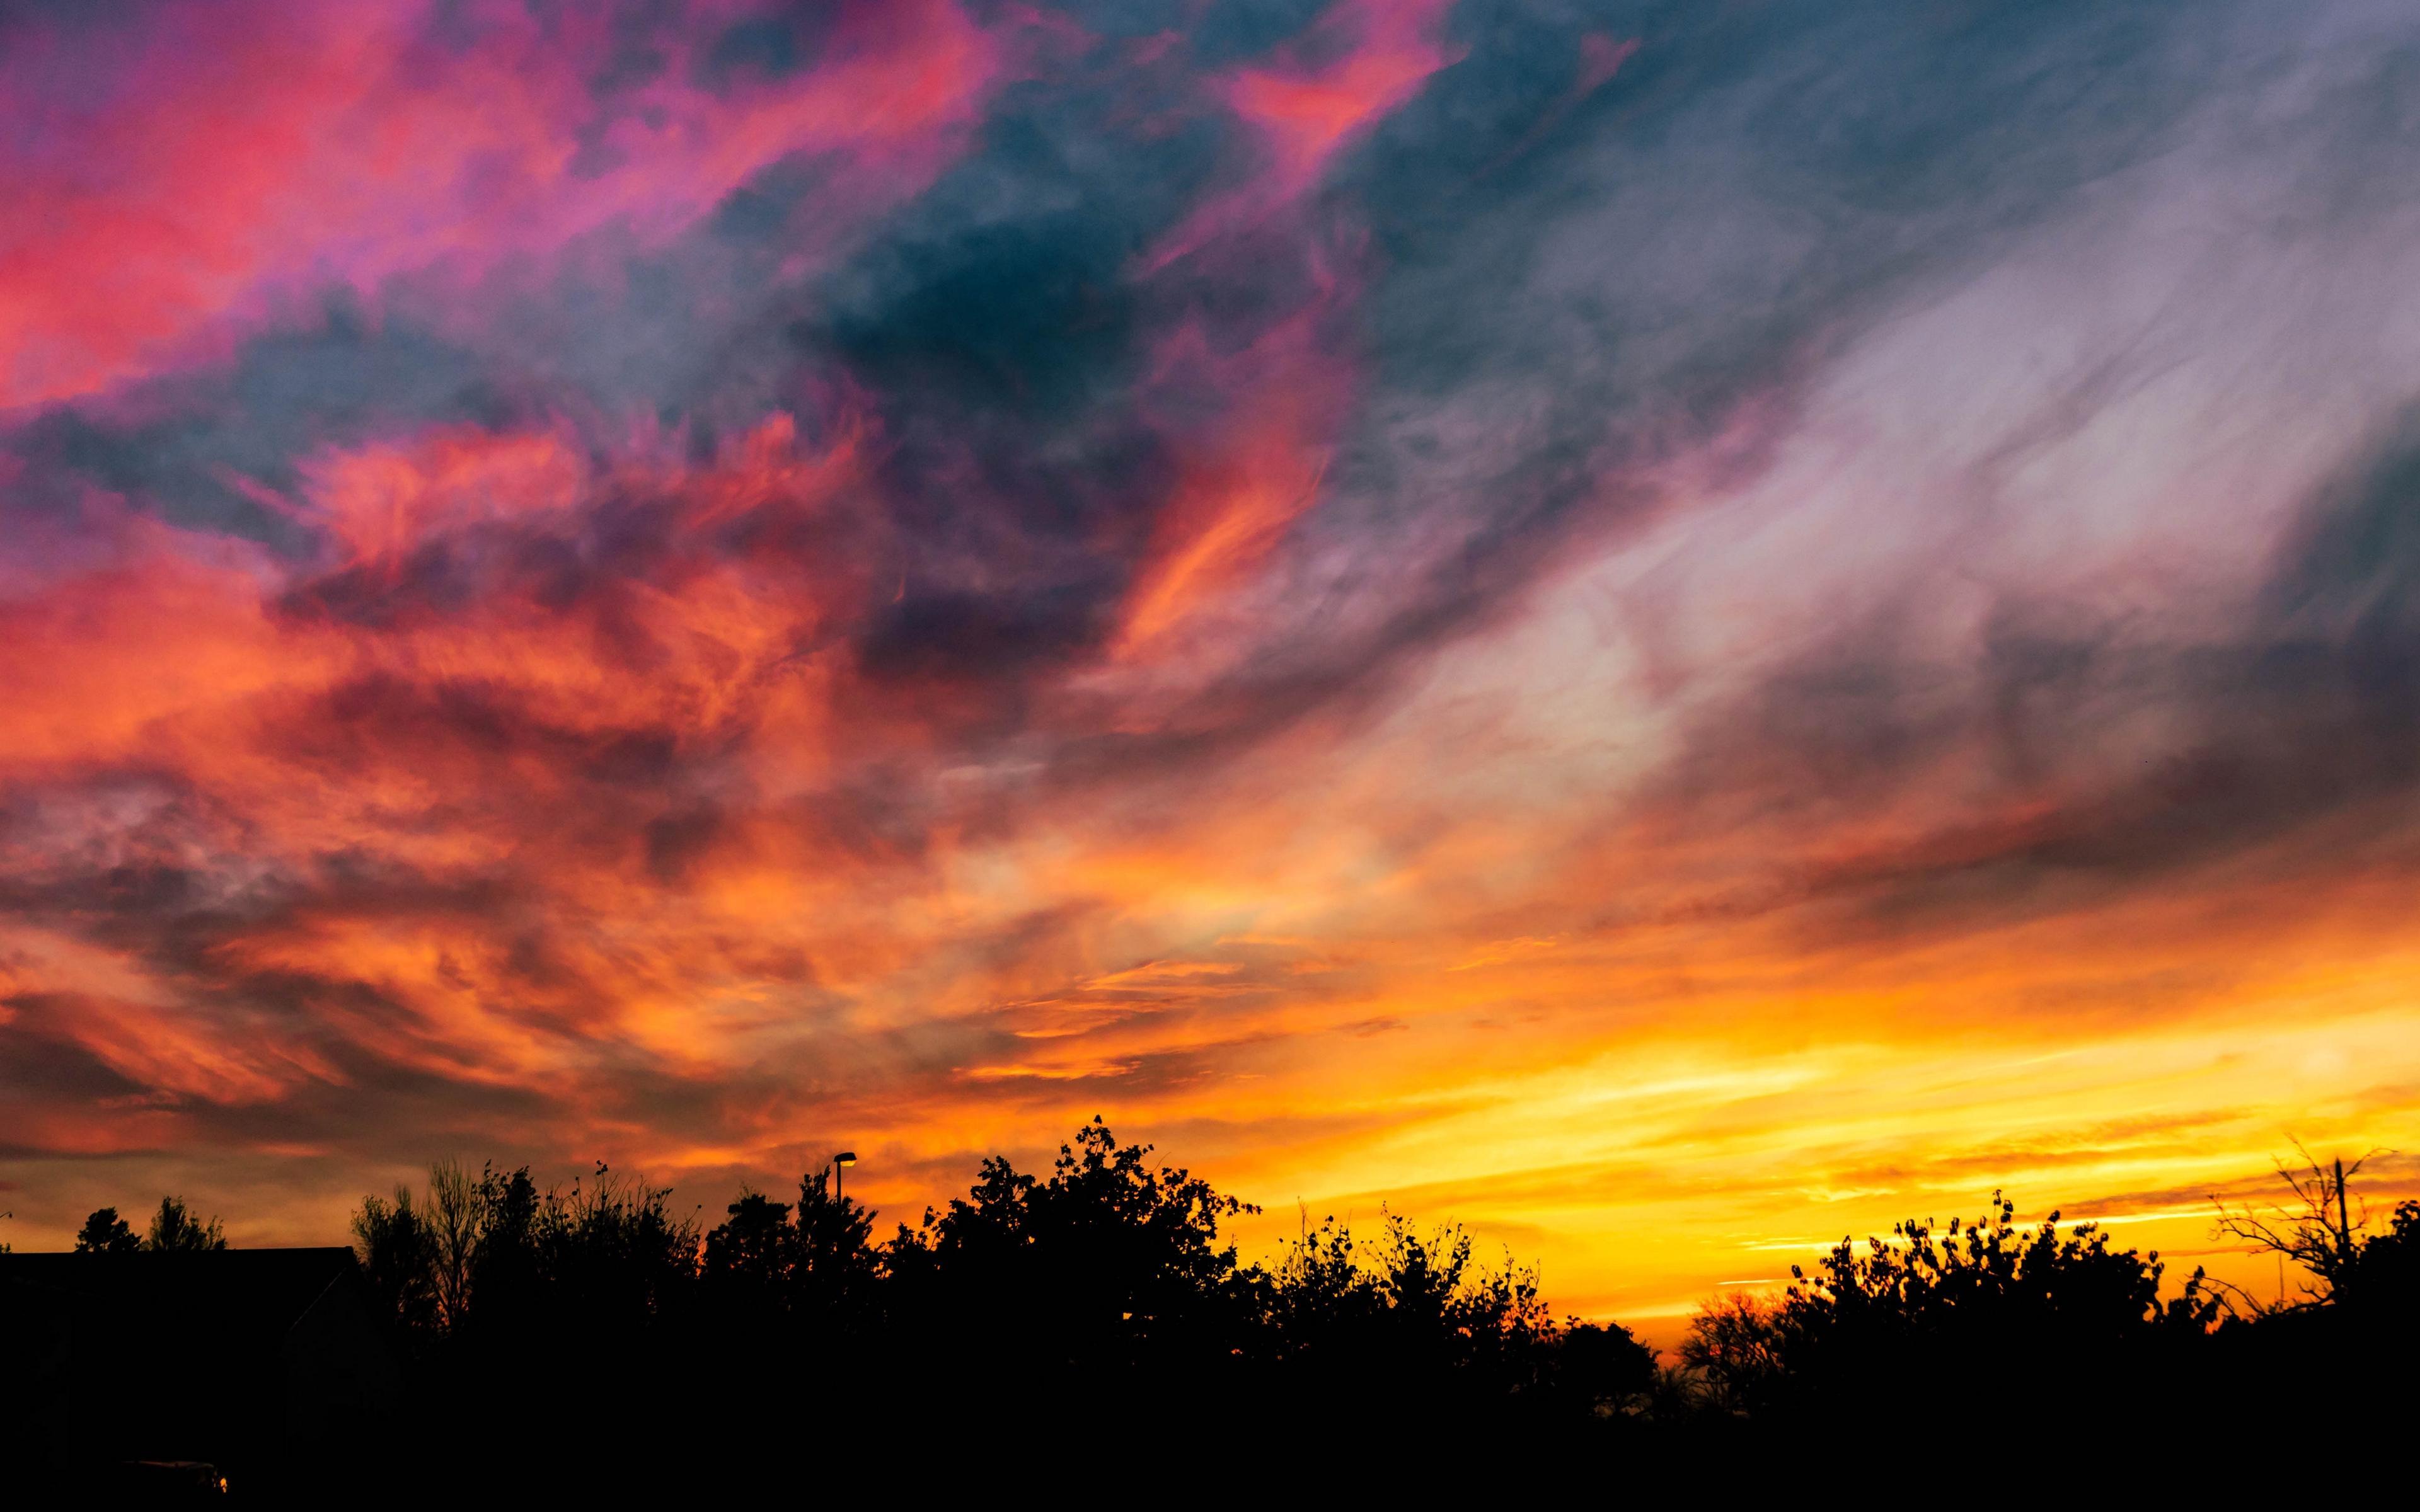 Download wallpaper 3840x2400 sunset, sky, trees, colorful 4k ultra